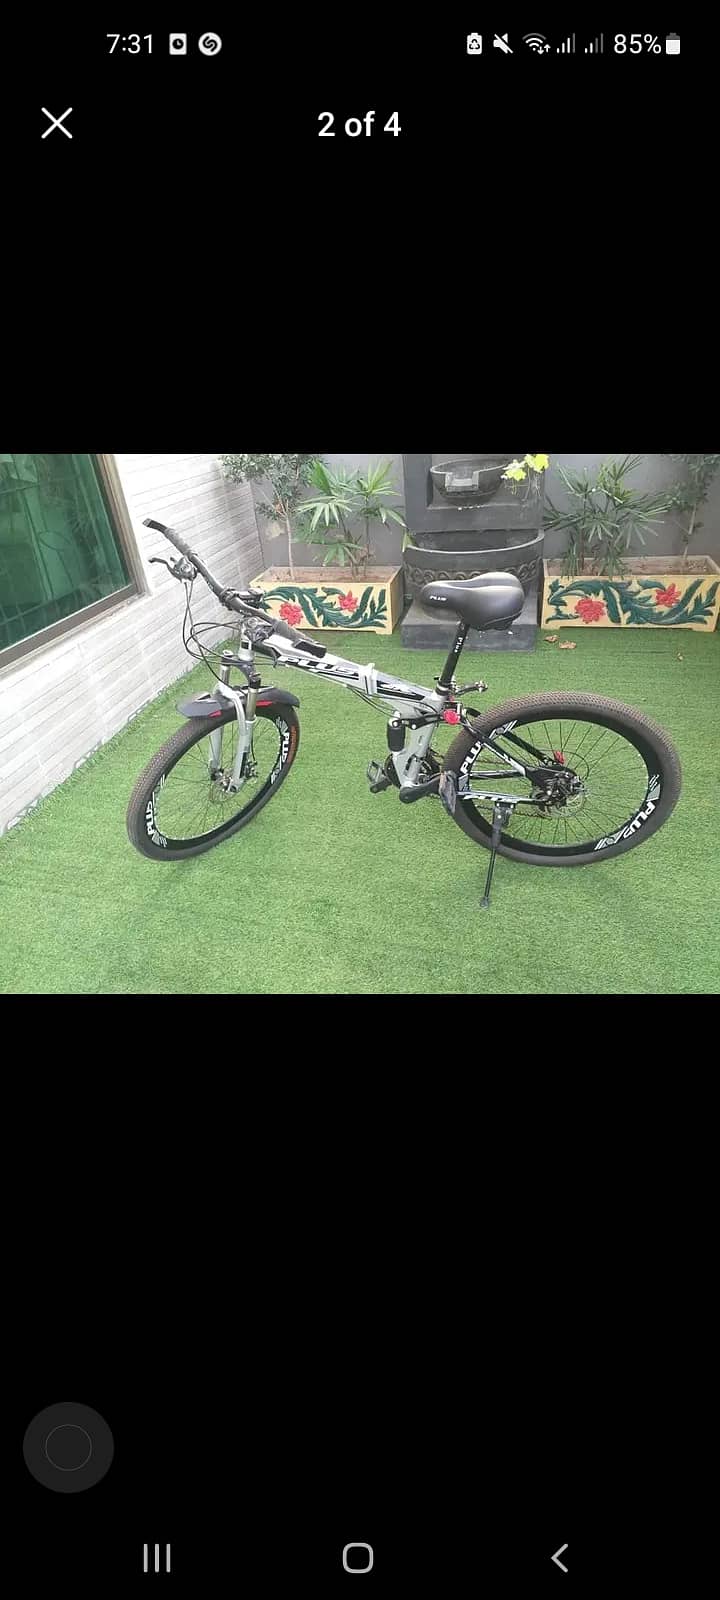 Plus mtb cycle imported from china 4